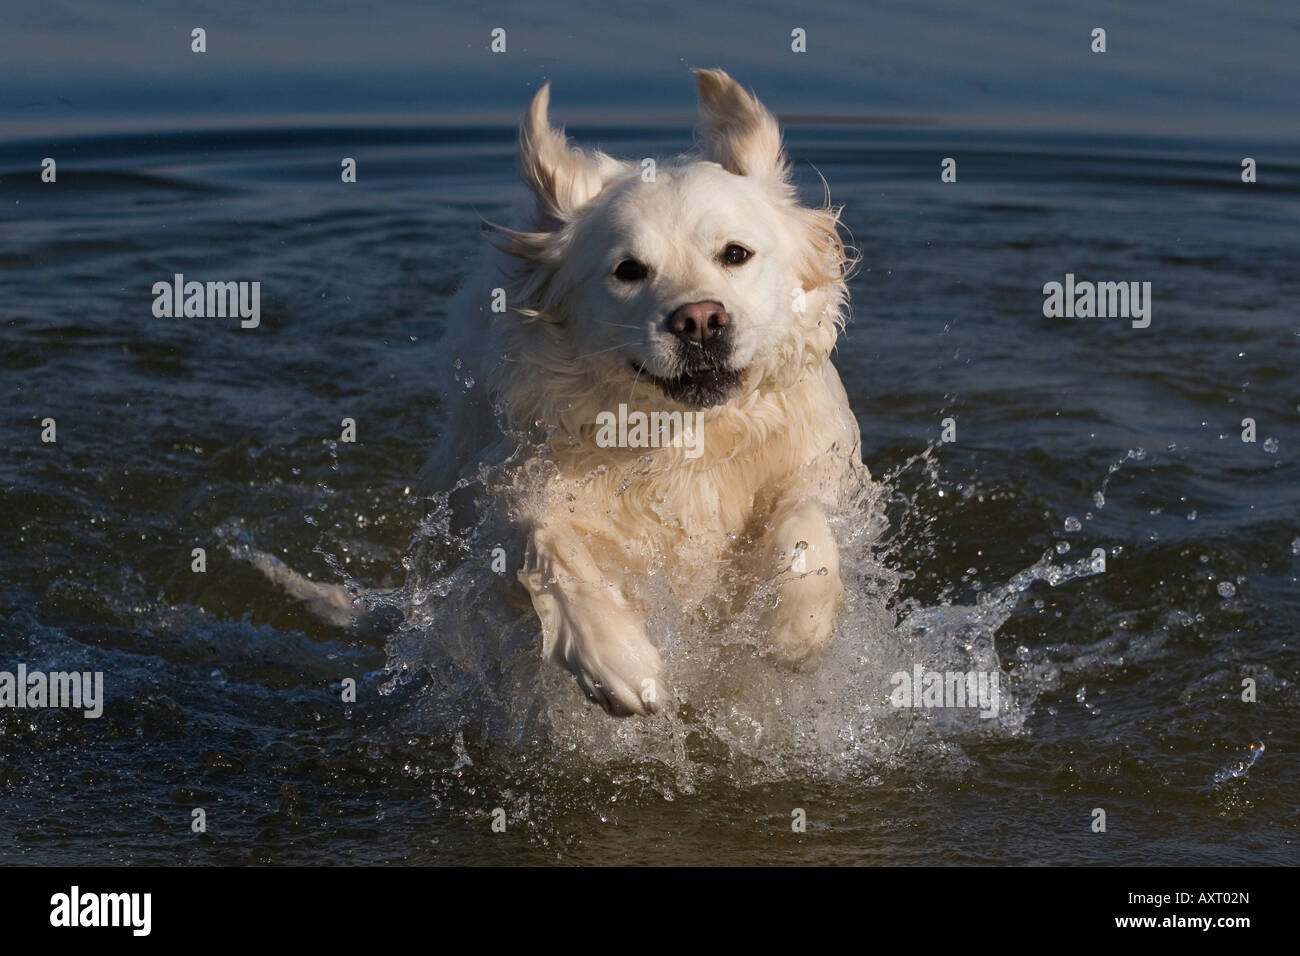 Golden Retriever leaping out of water Stock Photo